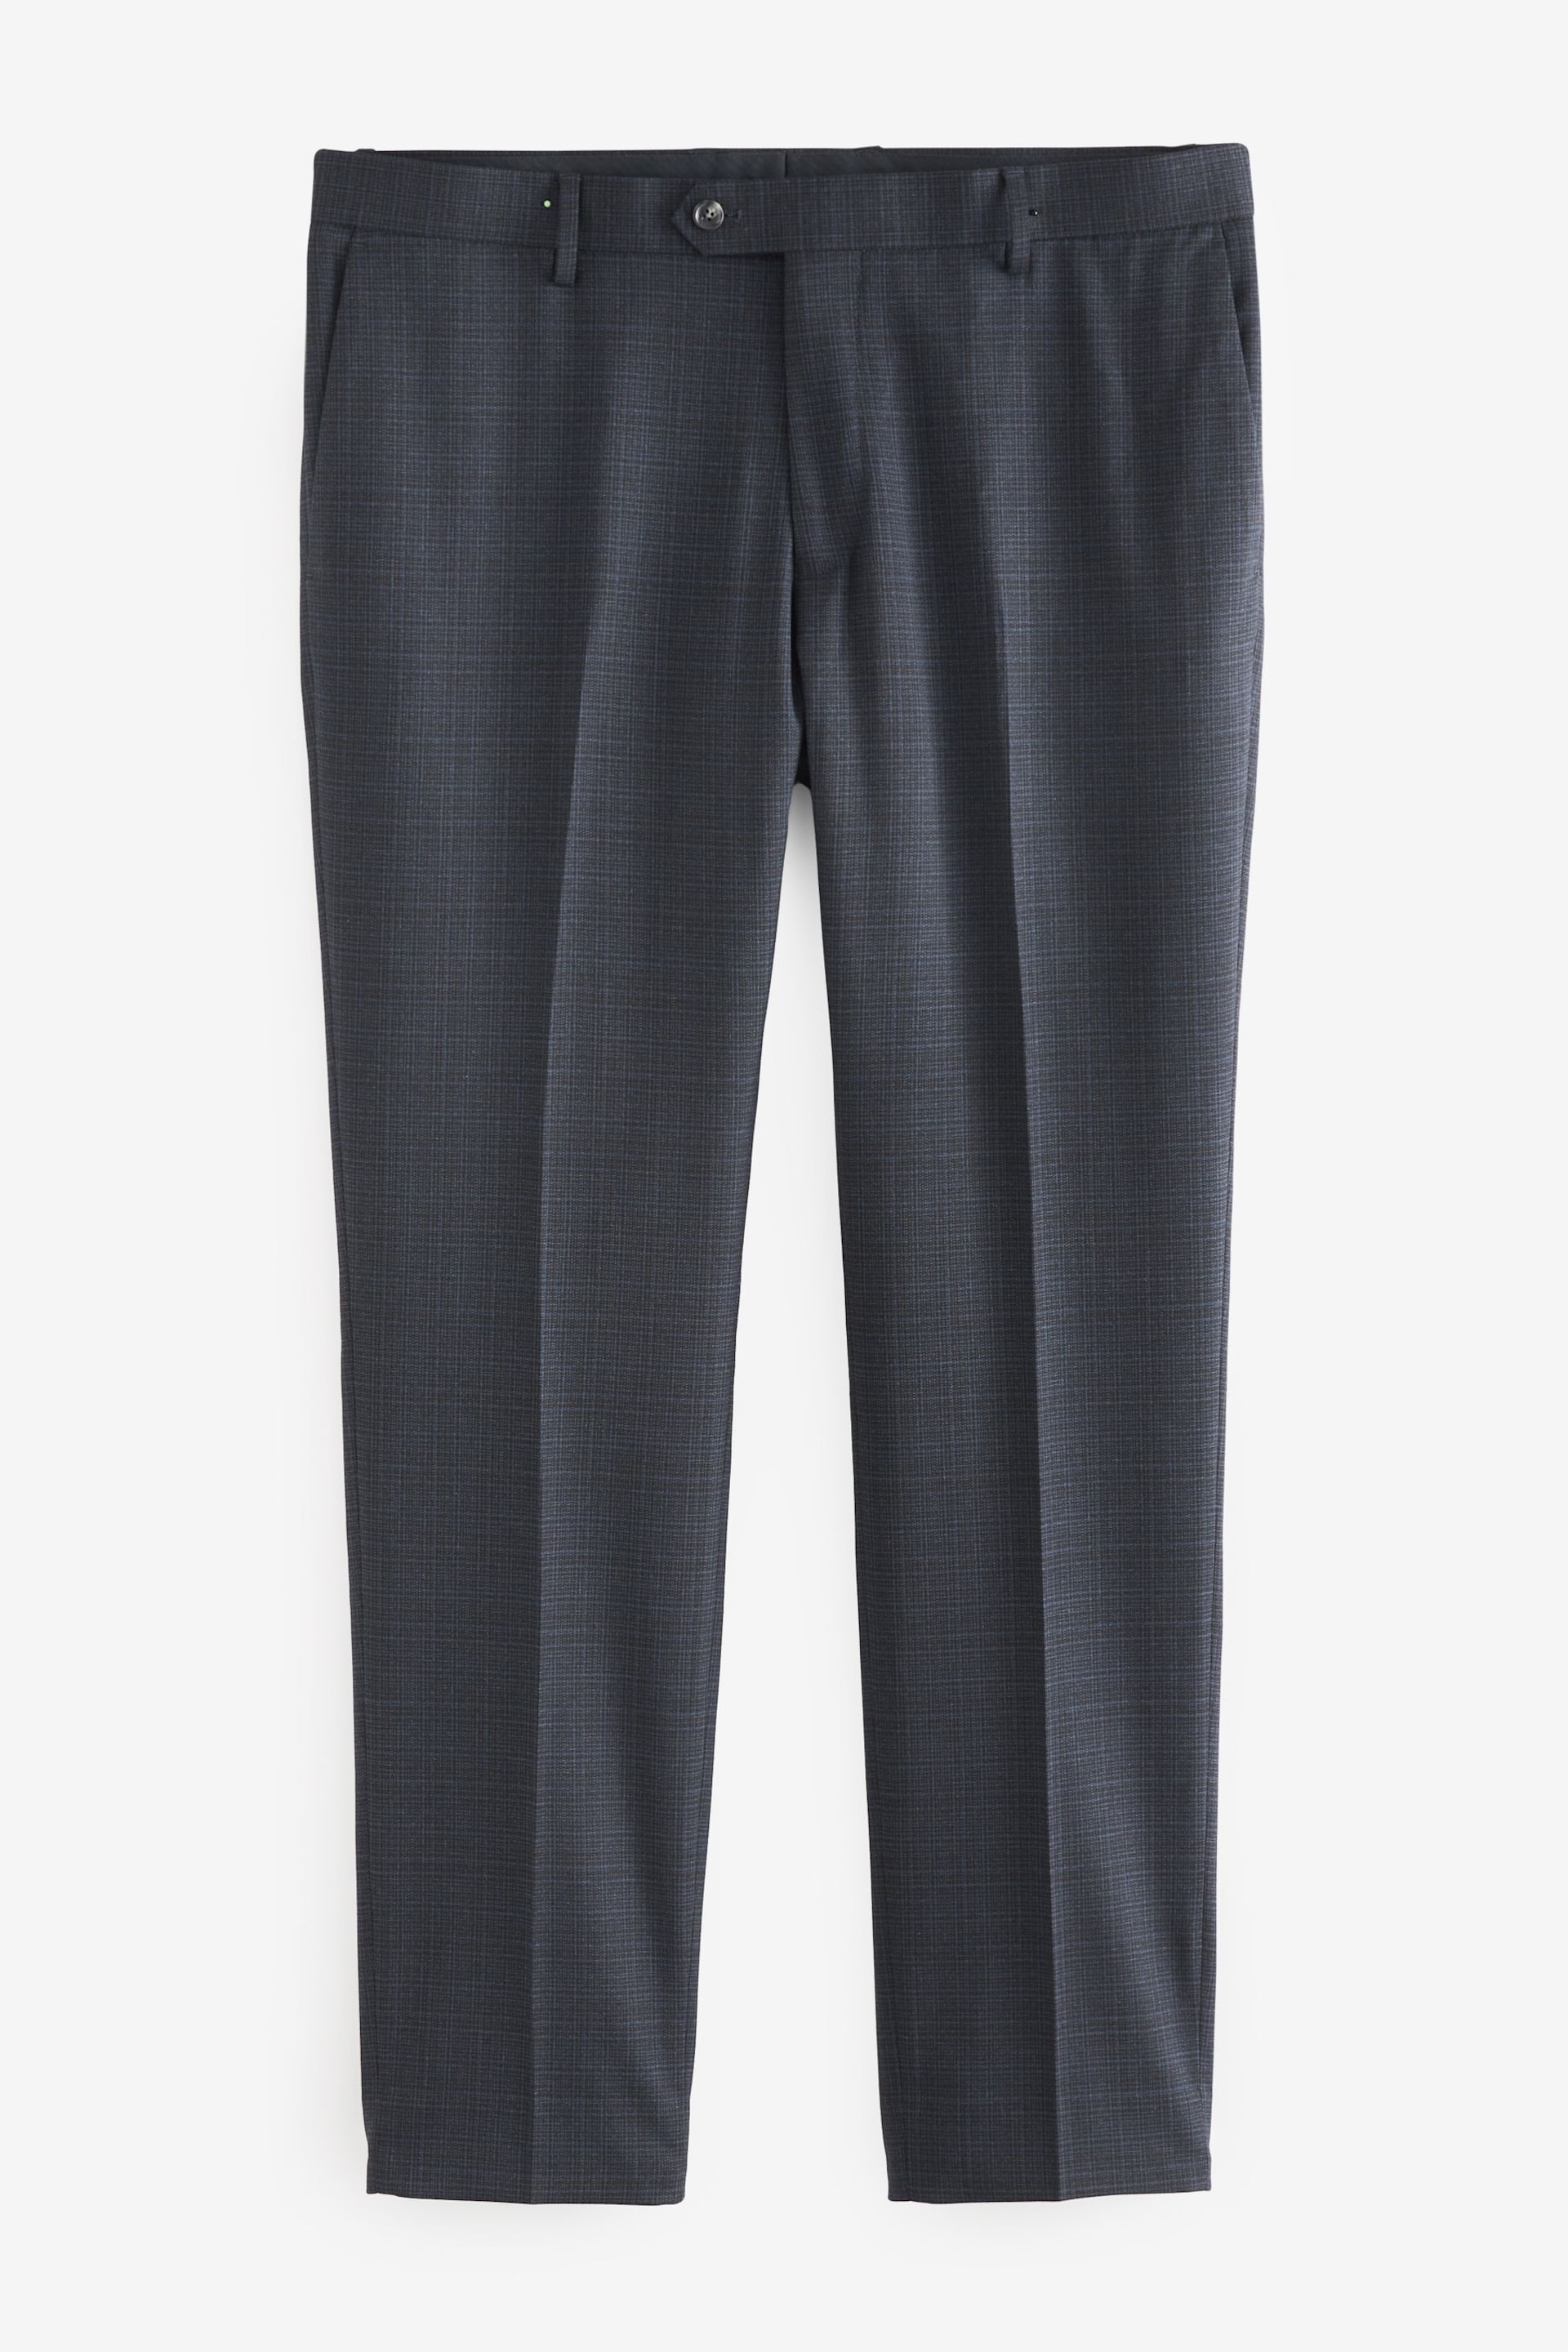 Navy Blue Skinny Check Suit Trousers - Image 5 of 10